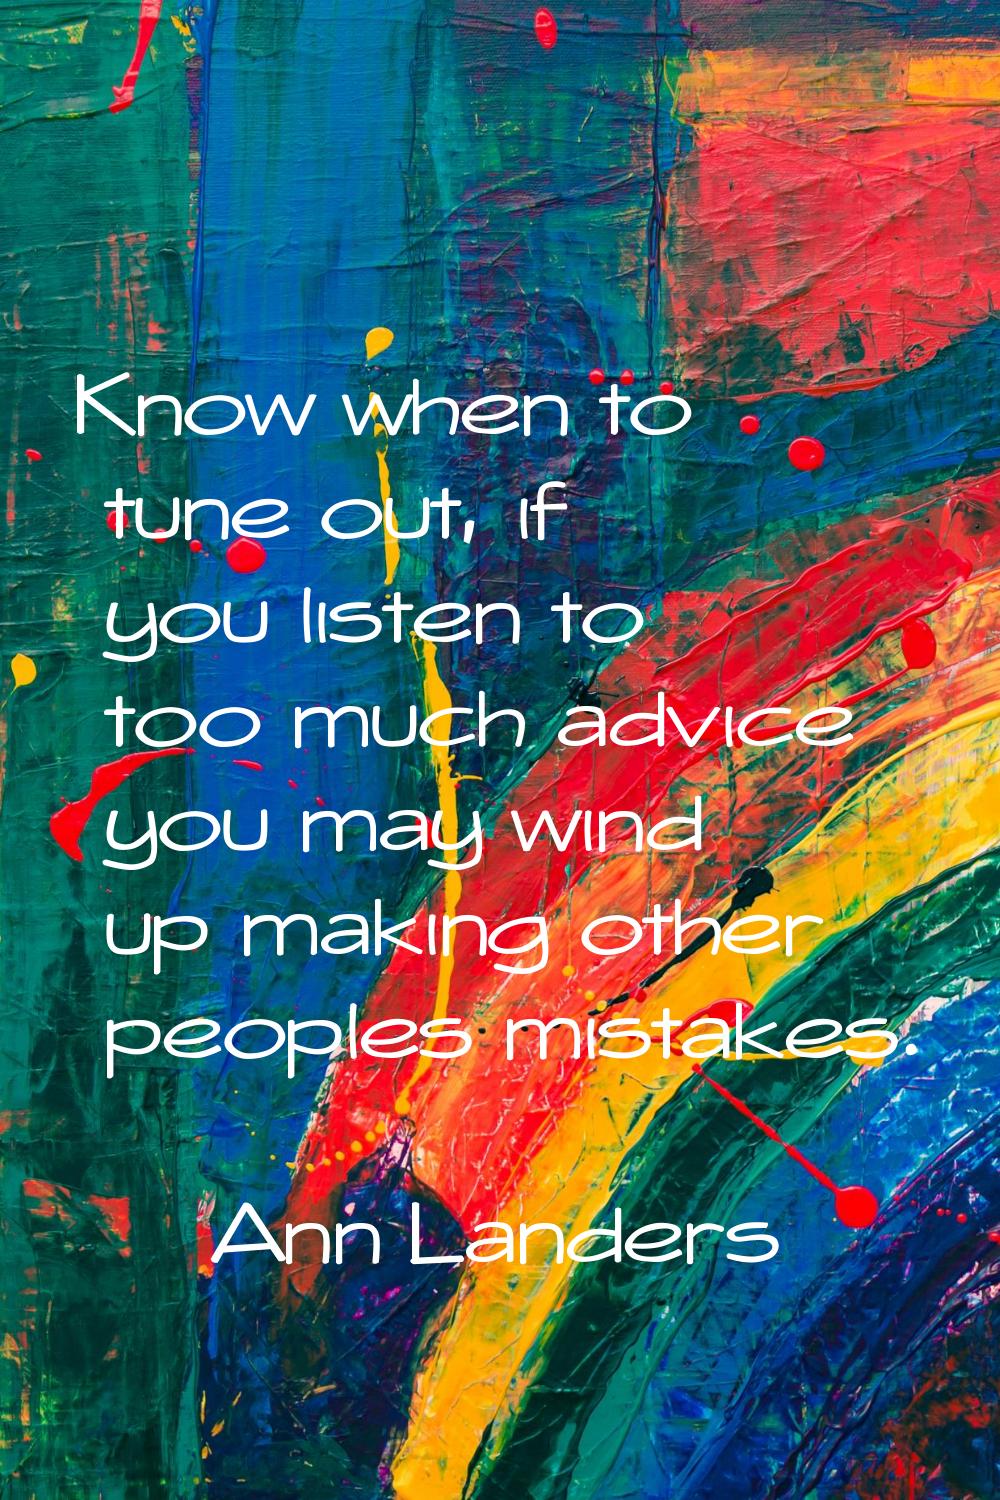 Know when to tune out, if you listen to too much advice you may wind up making other peoples mistak